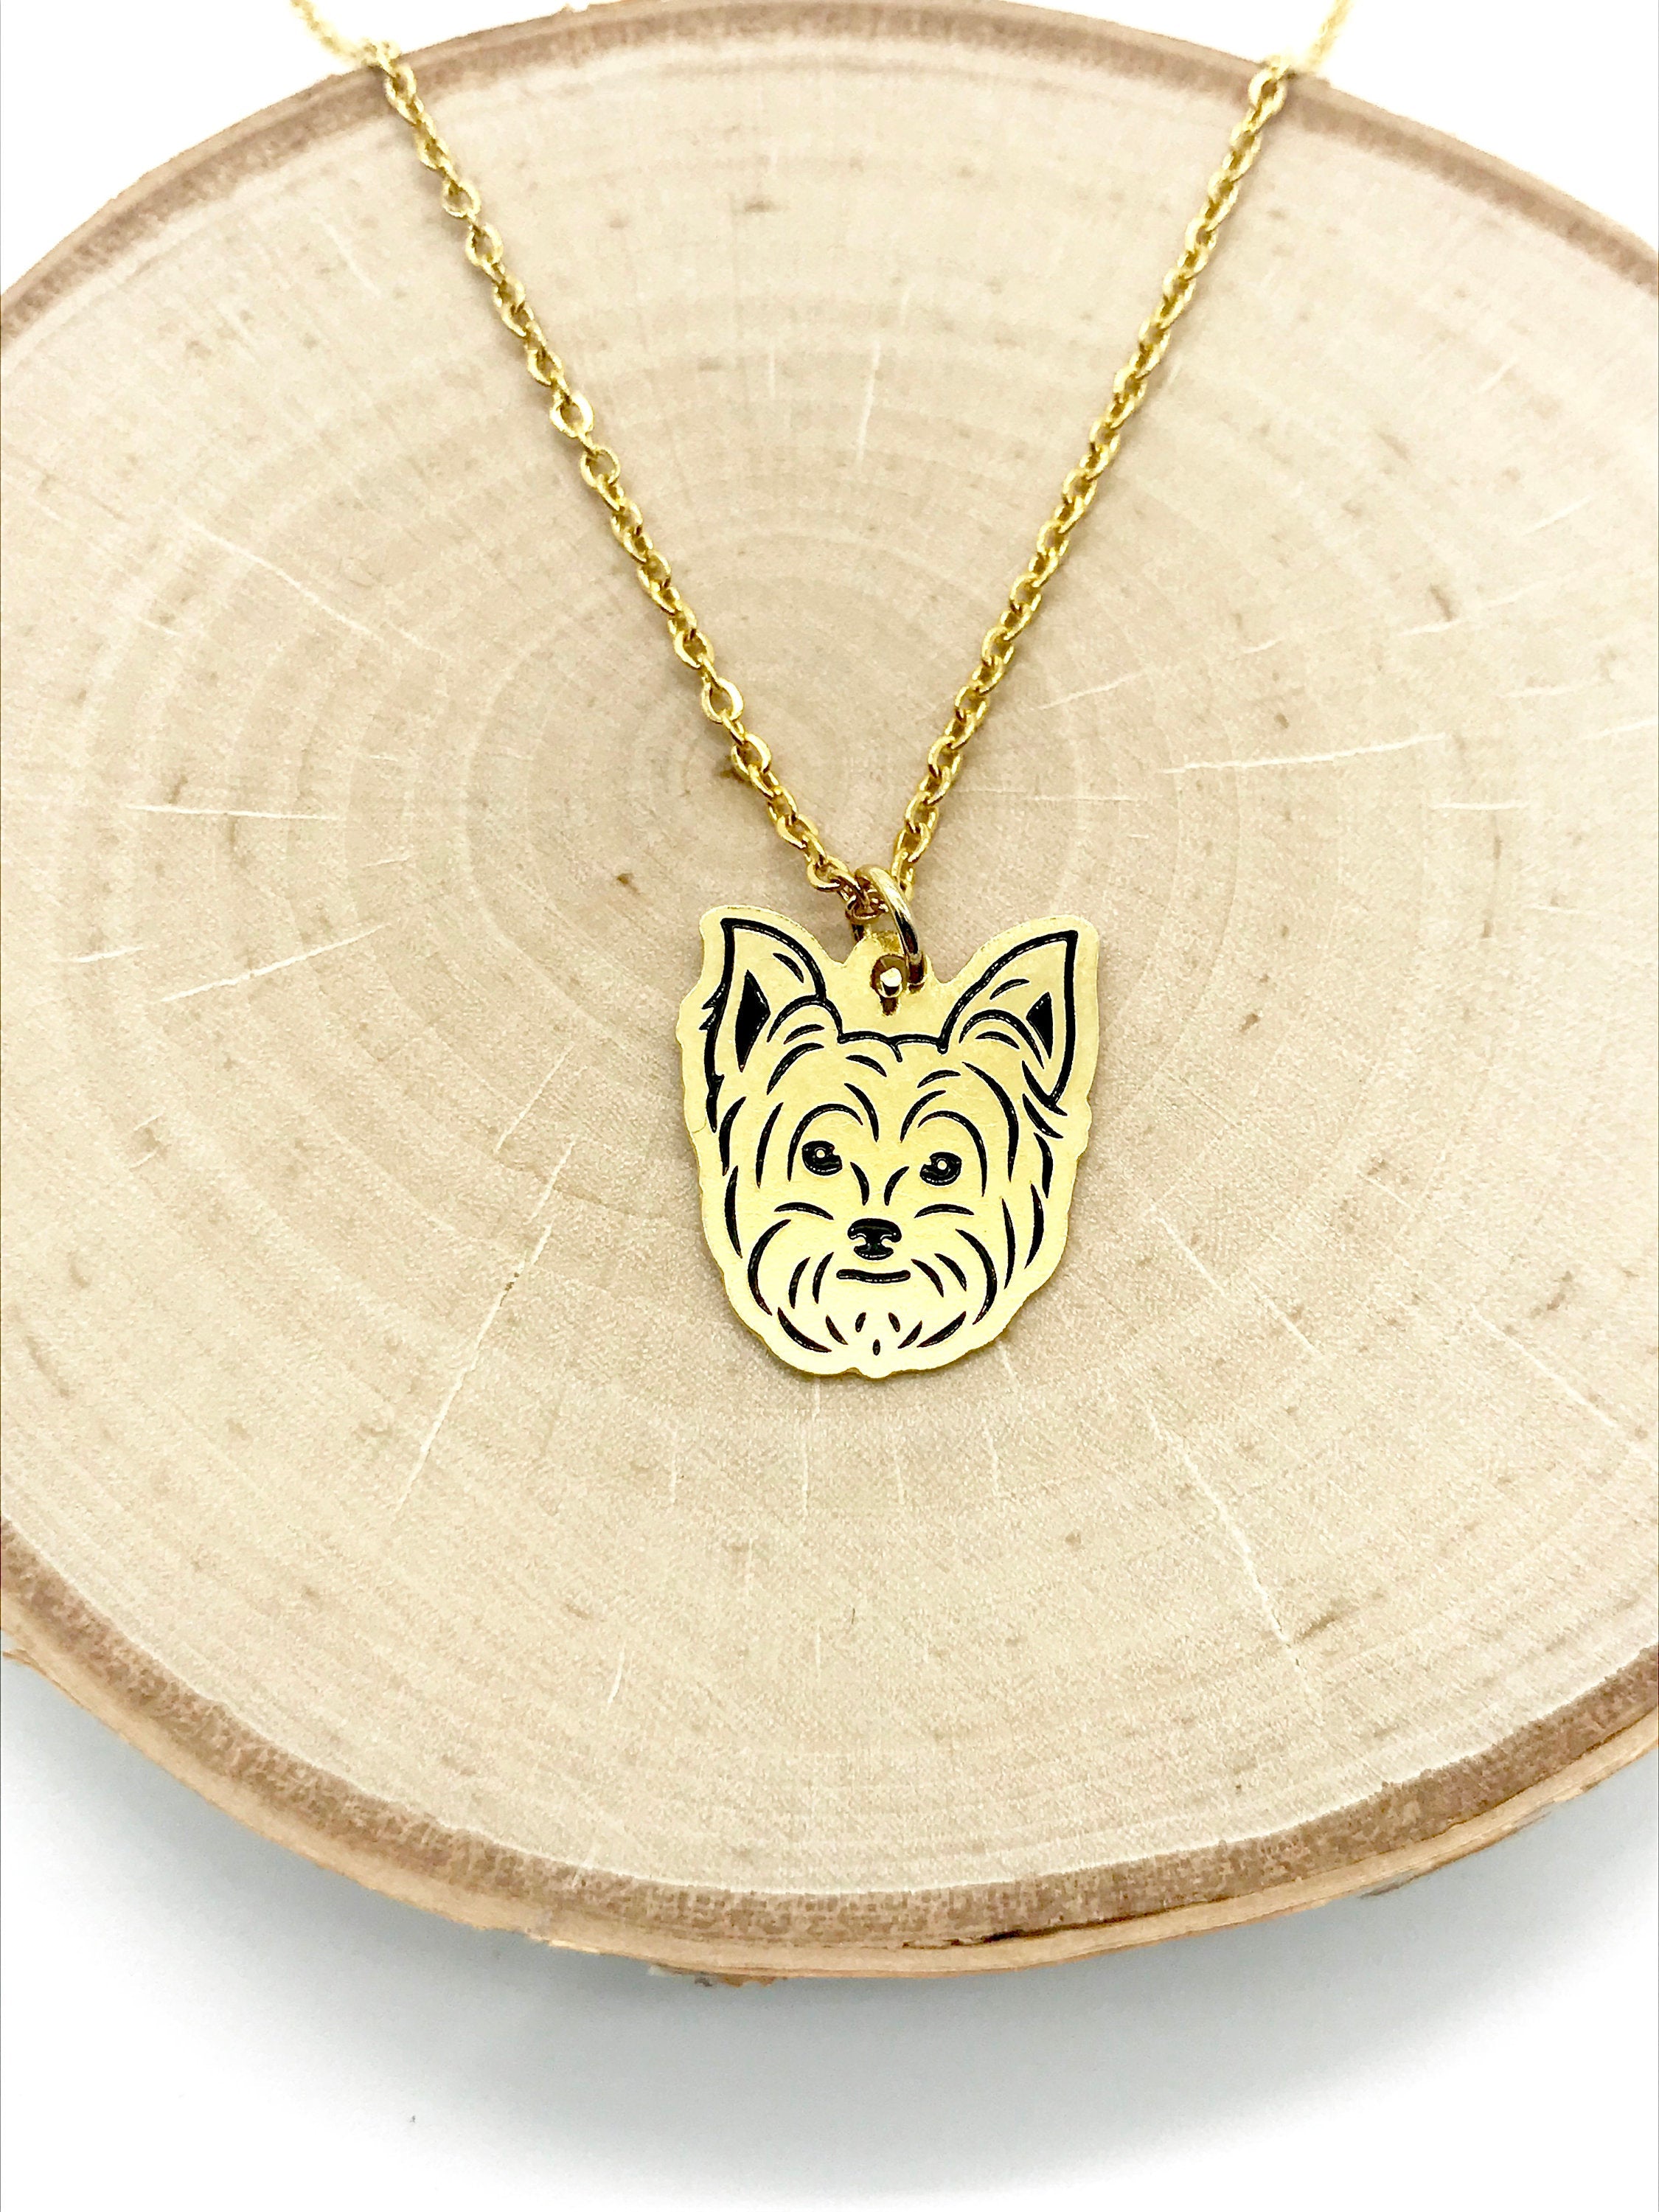 Yorkie Necklace, dog breeds, pet lovers, Necklace women, unique jewelry, Necklace, dog lovers, dog rescue, fashion jewelry